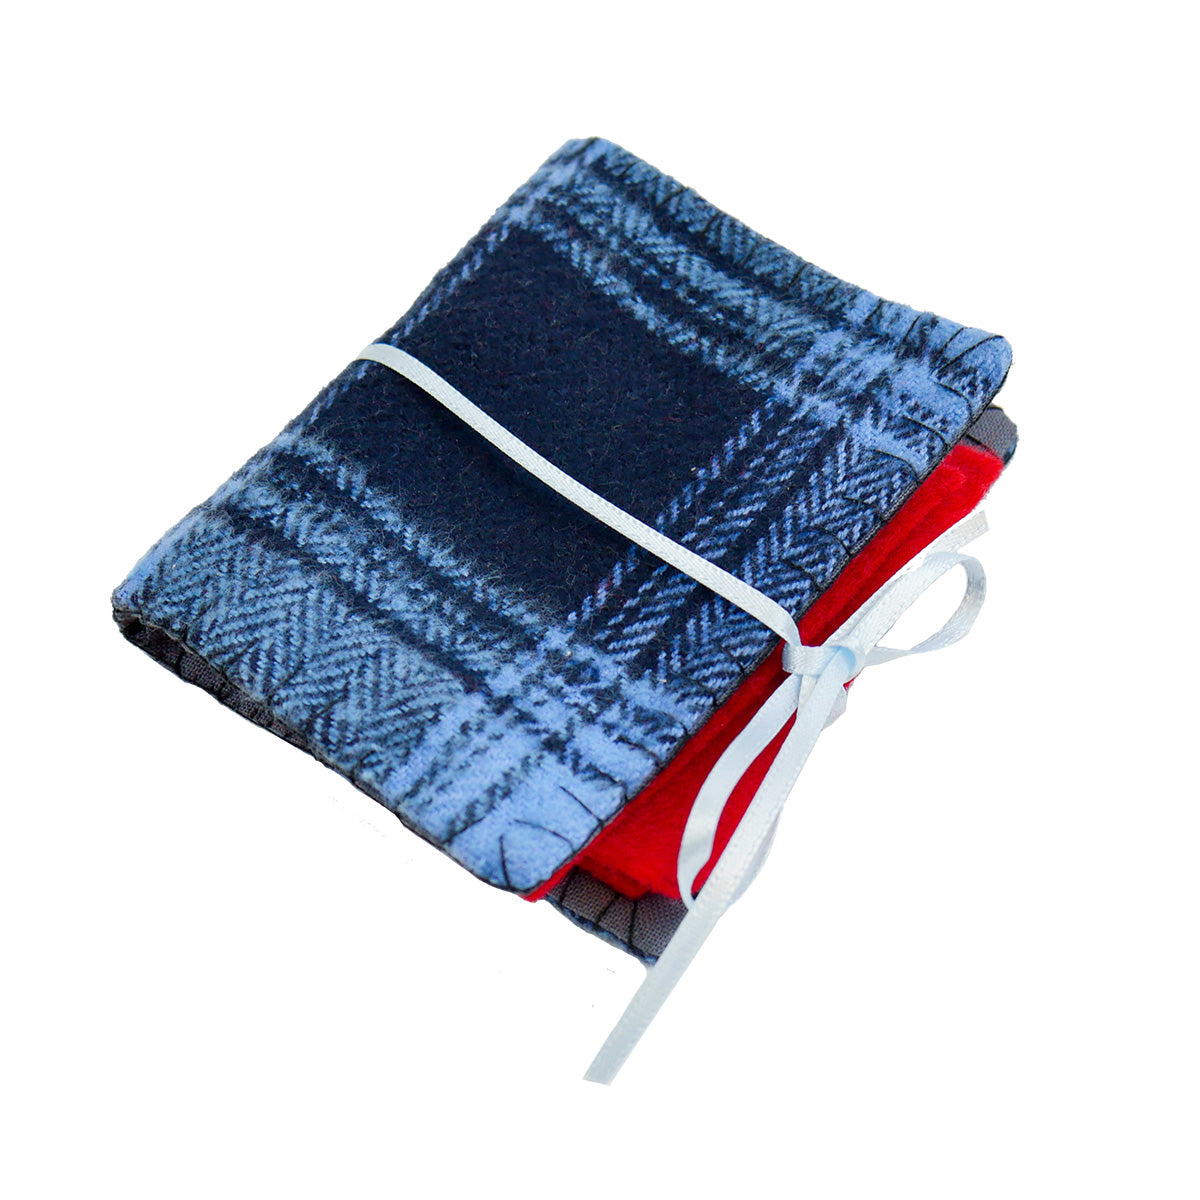 A single completed Needle Book with blue plaid patterned fabric on the outside, red felt pages on the inside, and a thin blue ribbon tying it closed around with a bow.